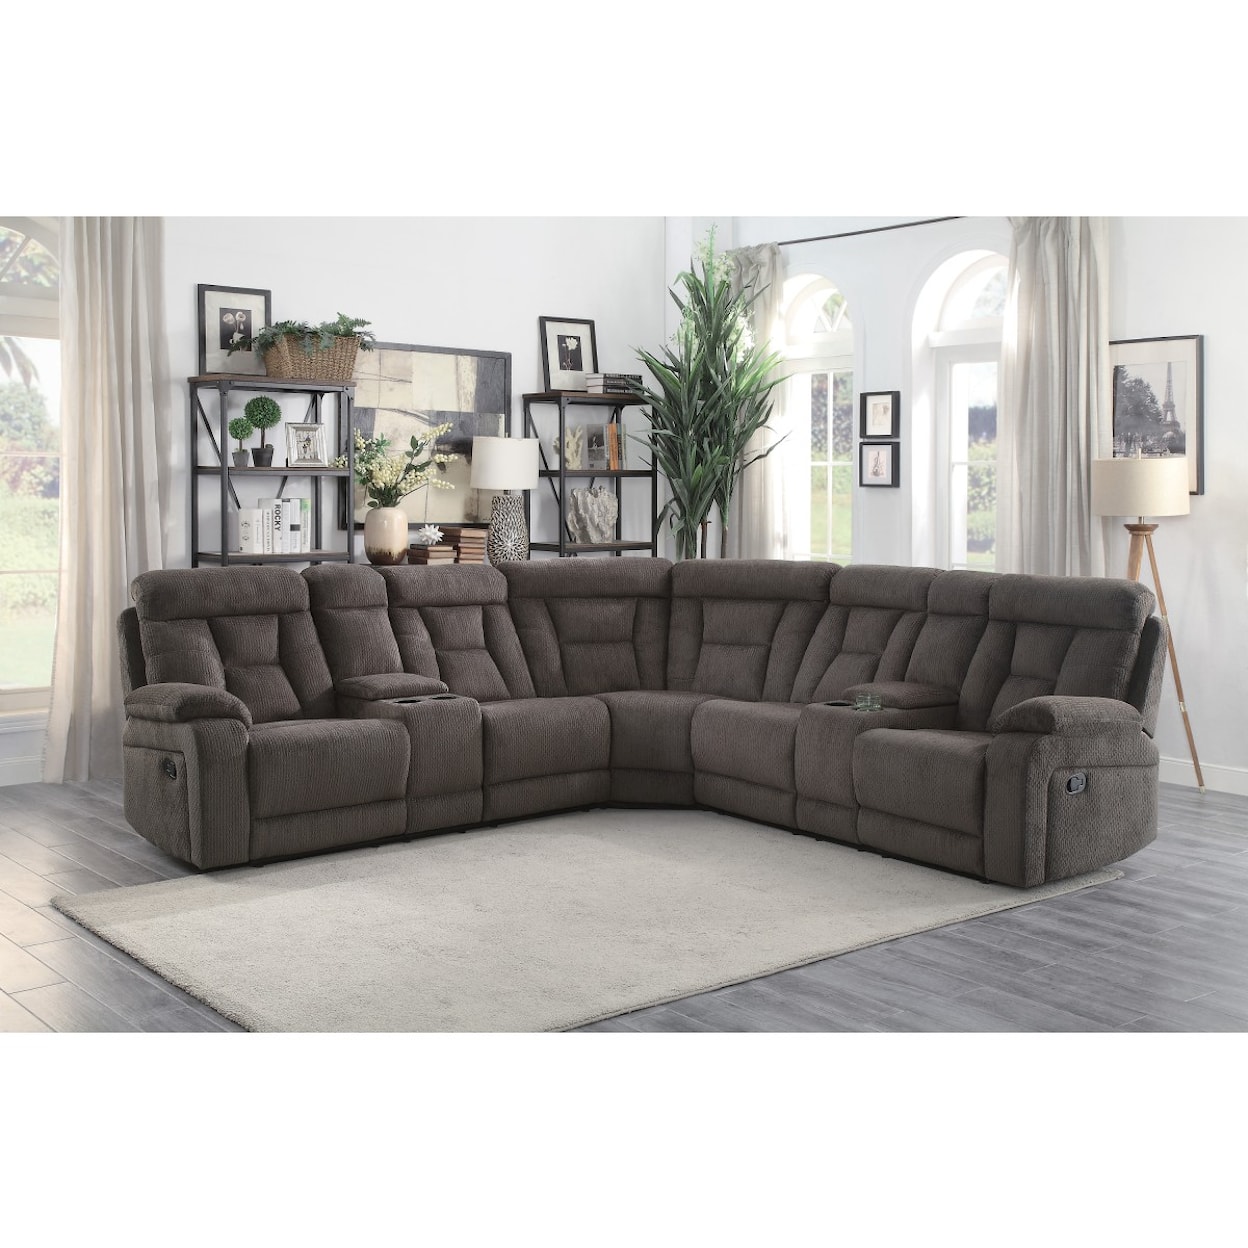 Homelegance Rosnay Reclining Sectional